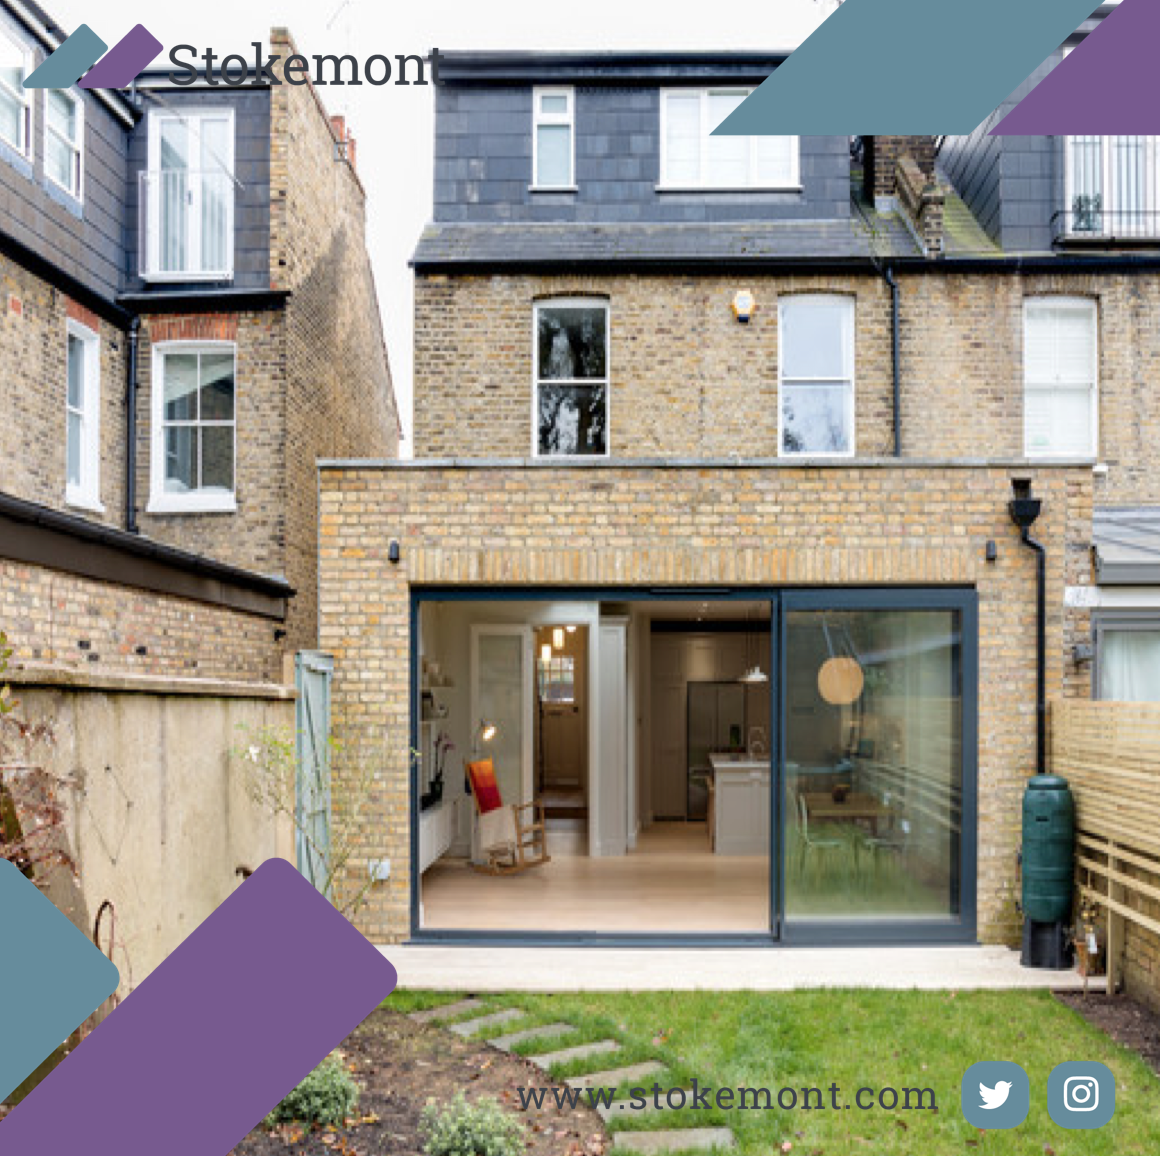 #planning on #undertaking a rear #extension why not #speak to our #team of #surveyors here at #Stokemont #today